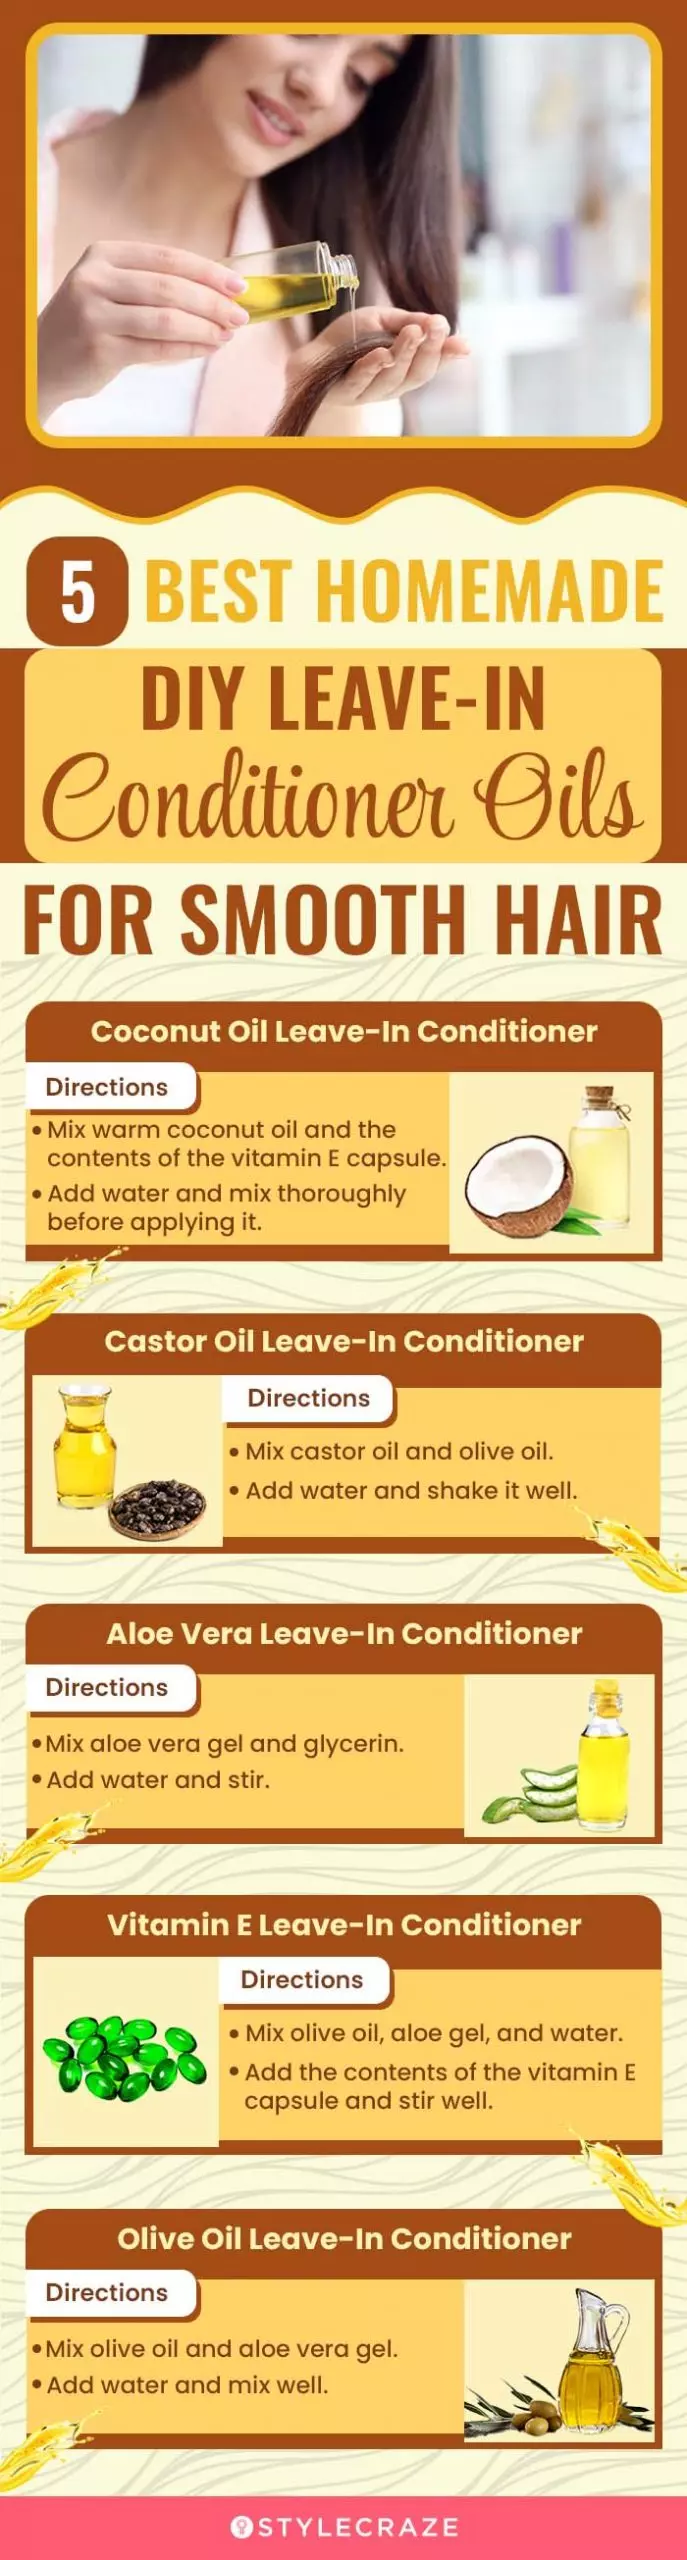 5 best homemade diy leavein conditioner oils for smooth hair (infographic)